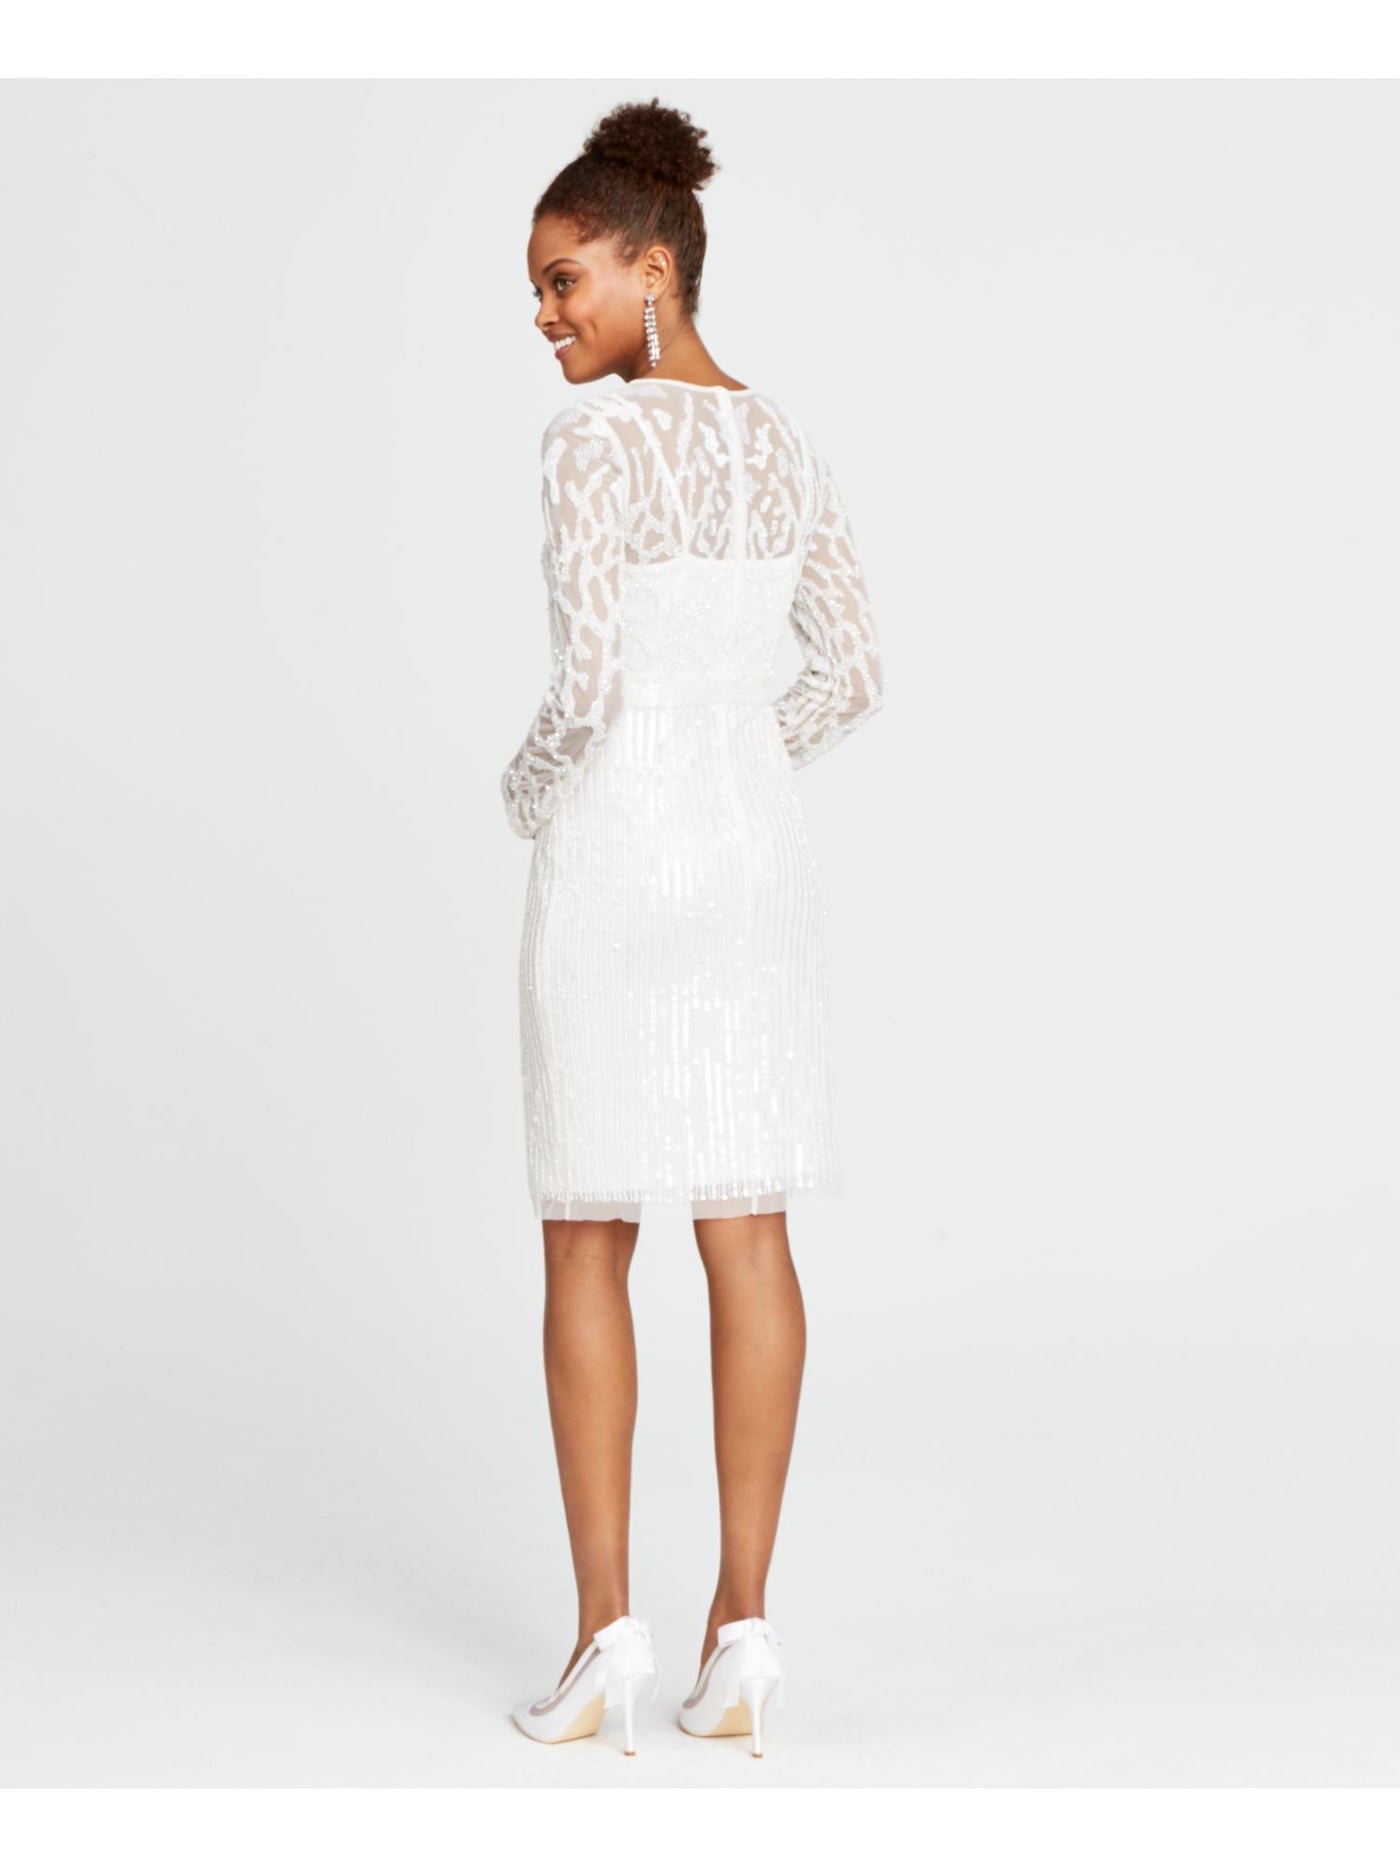 ADRIANNA PAPELL Womens White Beaded Sequined Zippered Printed Long Sleeve Illusion Neckline Above The Knee Formal Sheath Dress 10